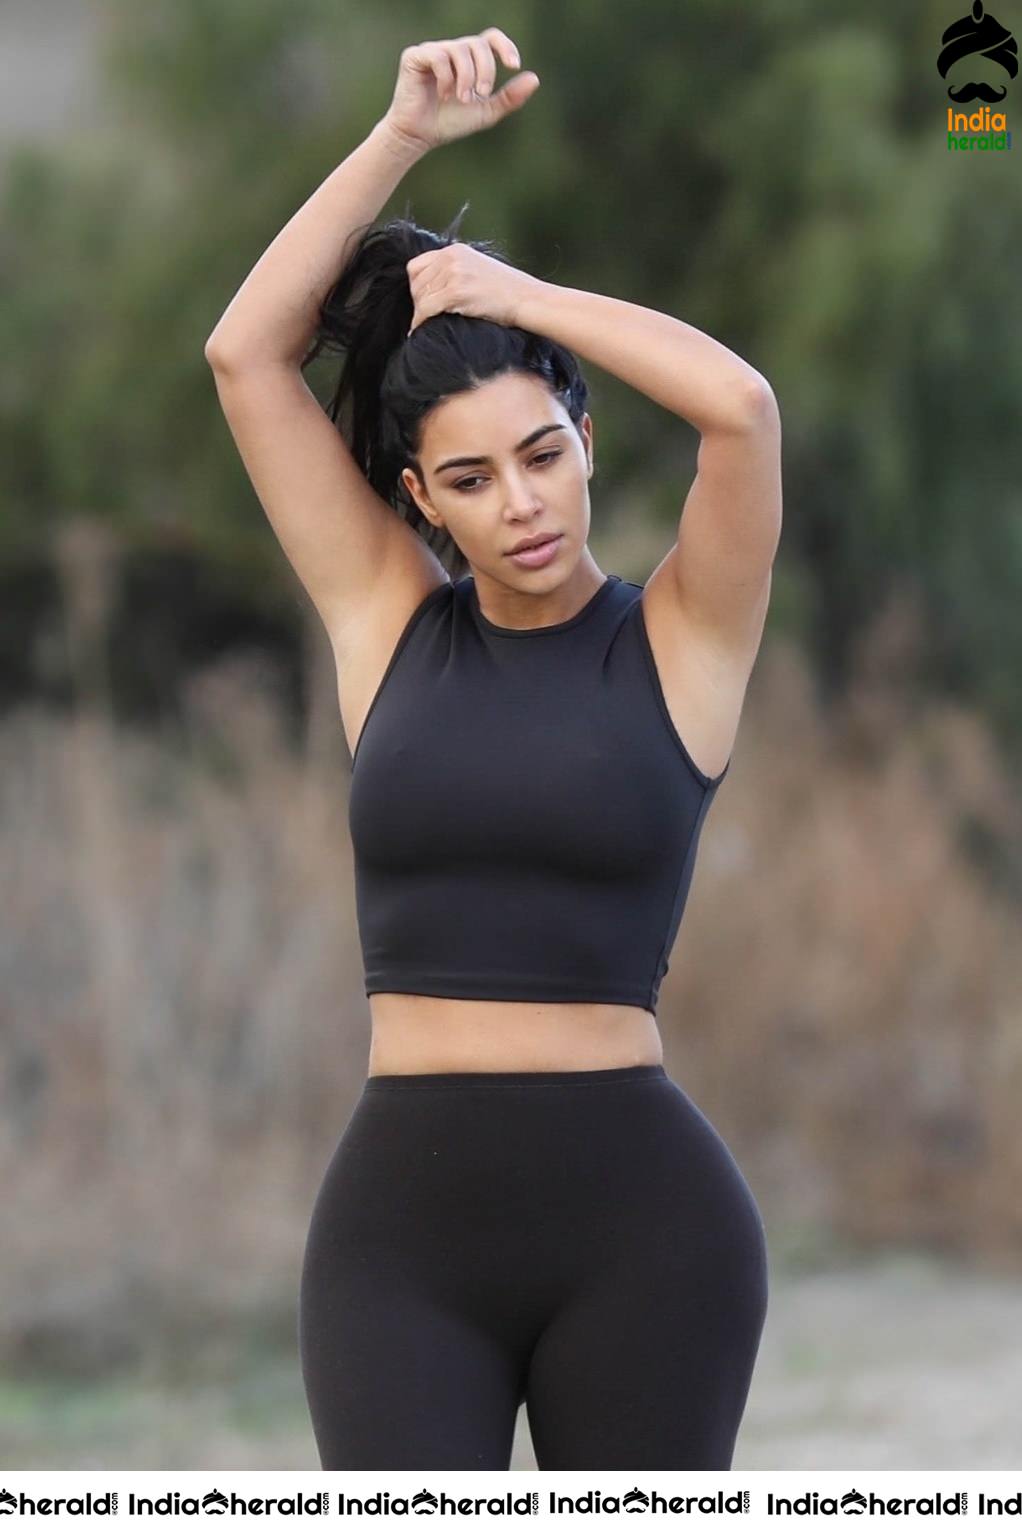 Kim Kardashian in a Tight Sexy dress and seen on a hike session in Calabasas